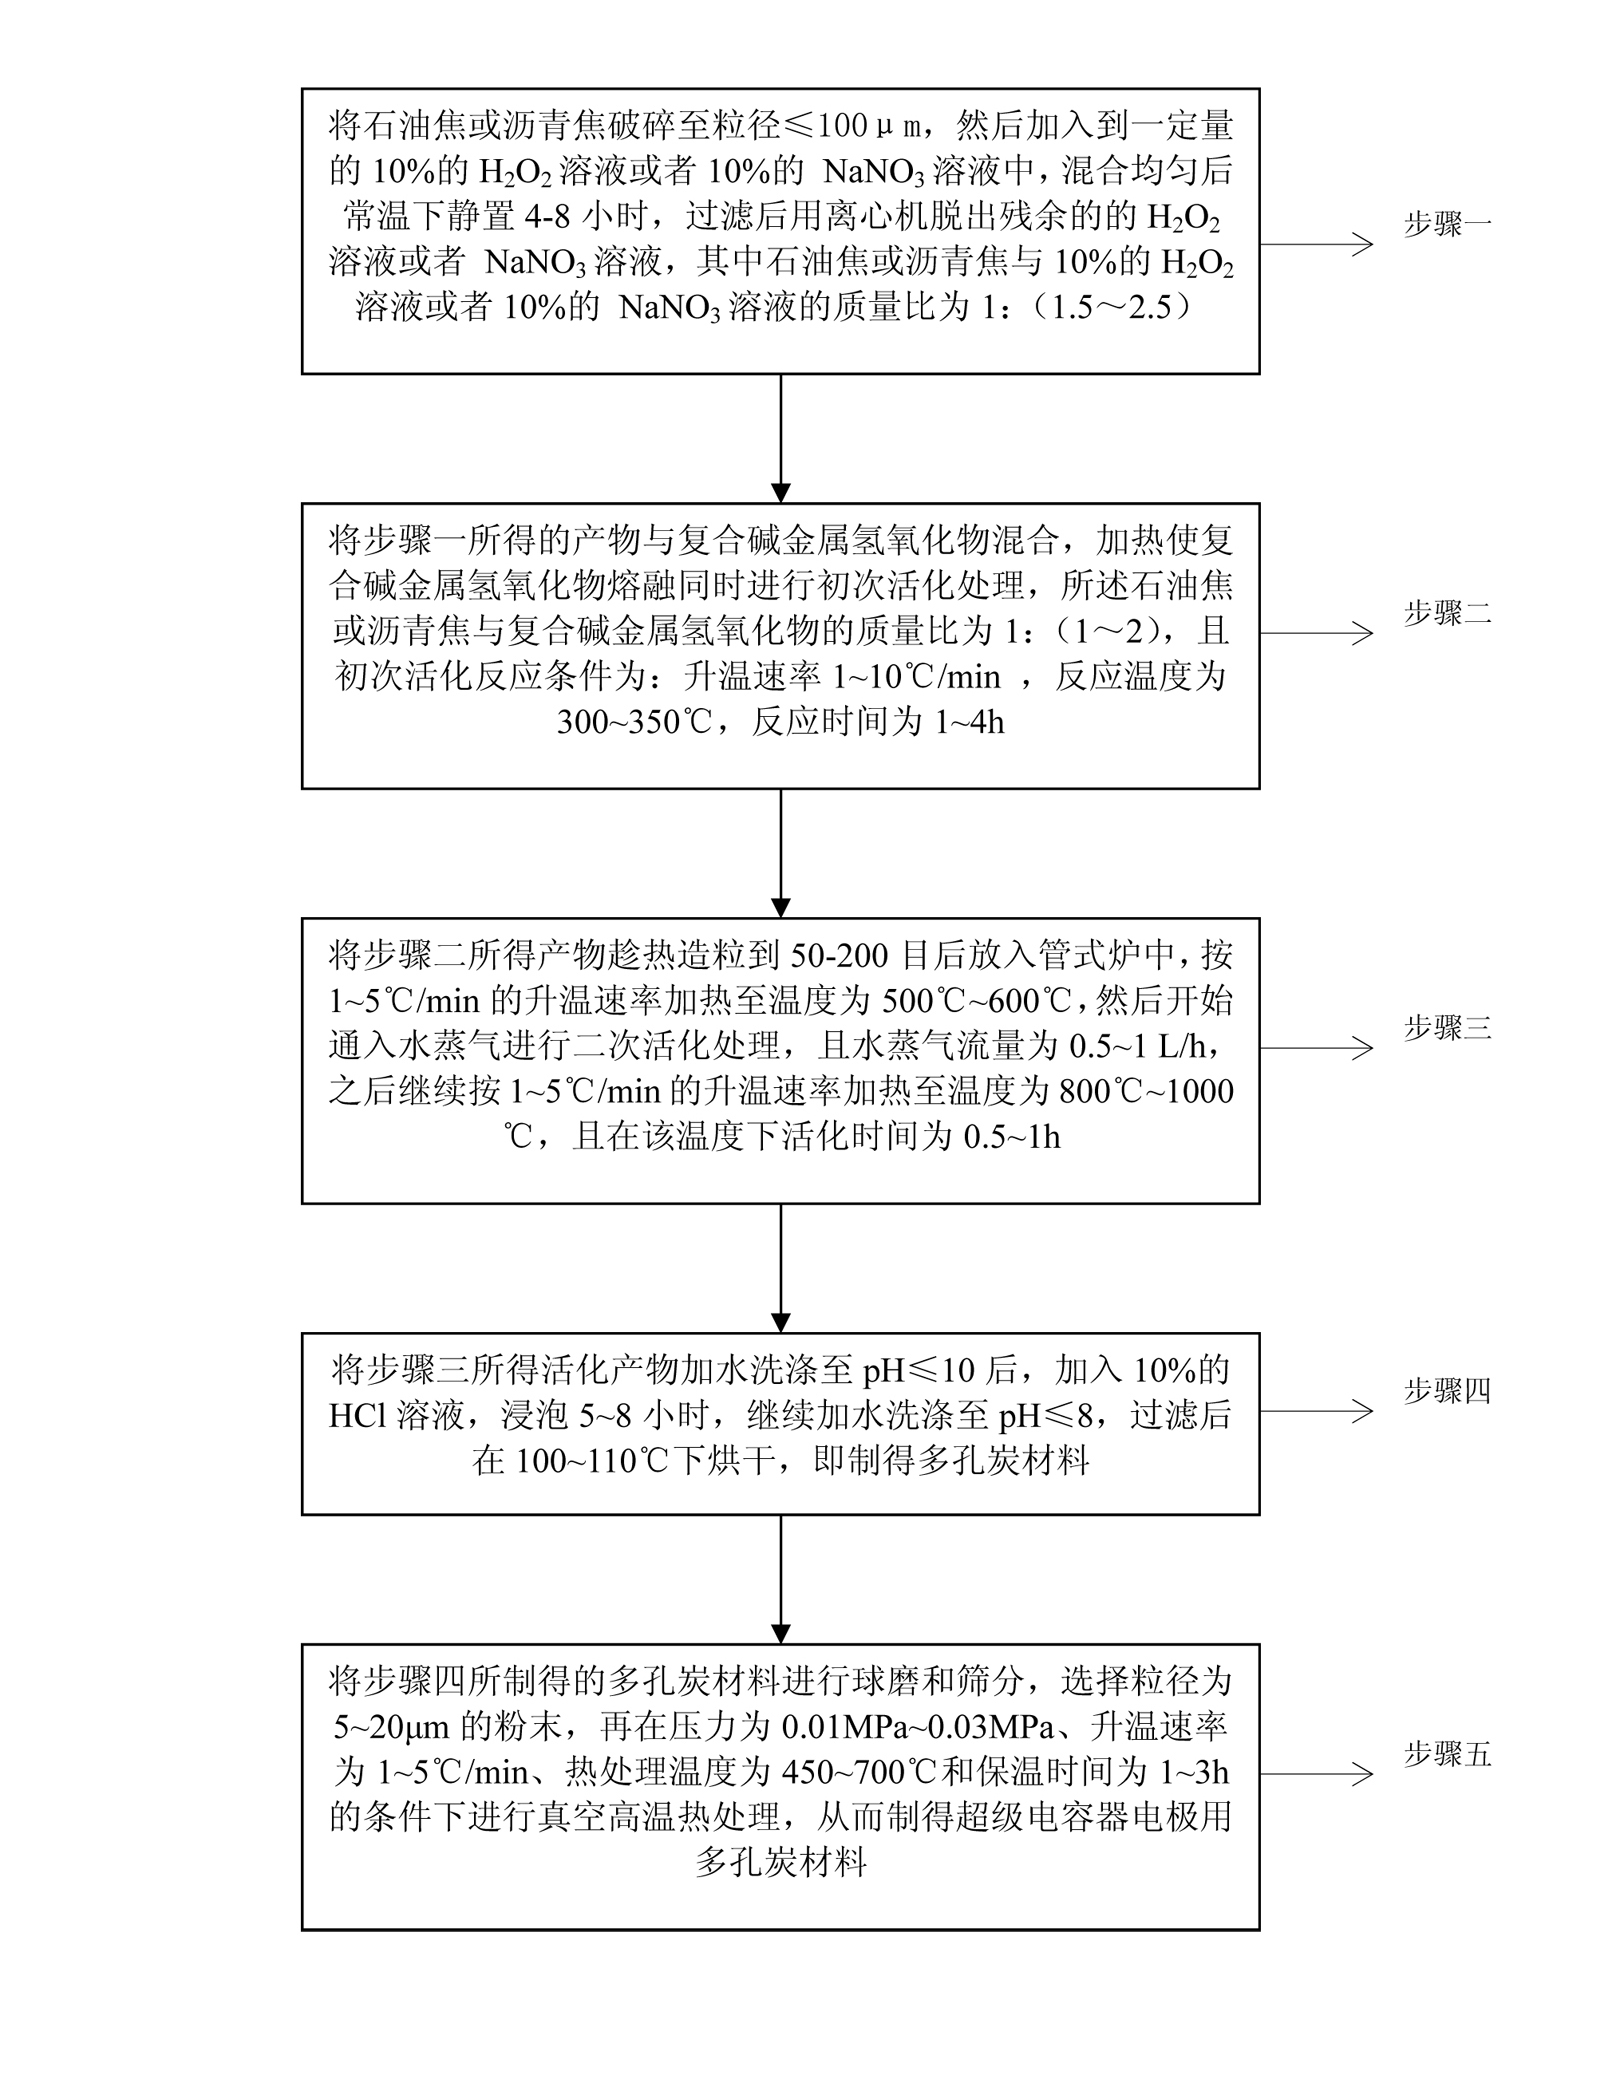 Preparation method of porous carbon material for supercapacitor